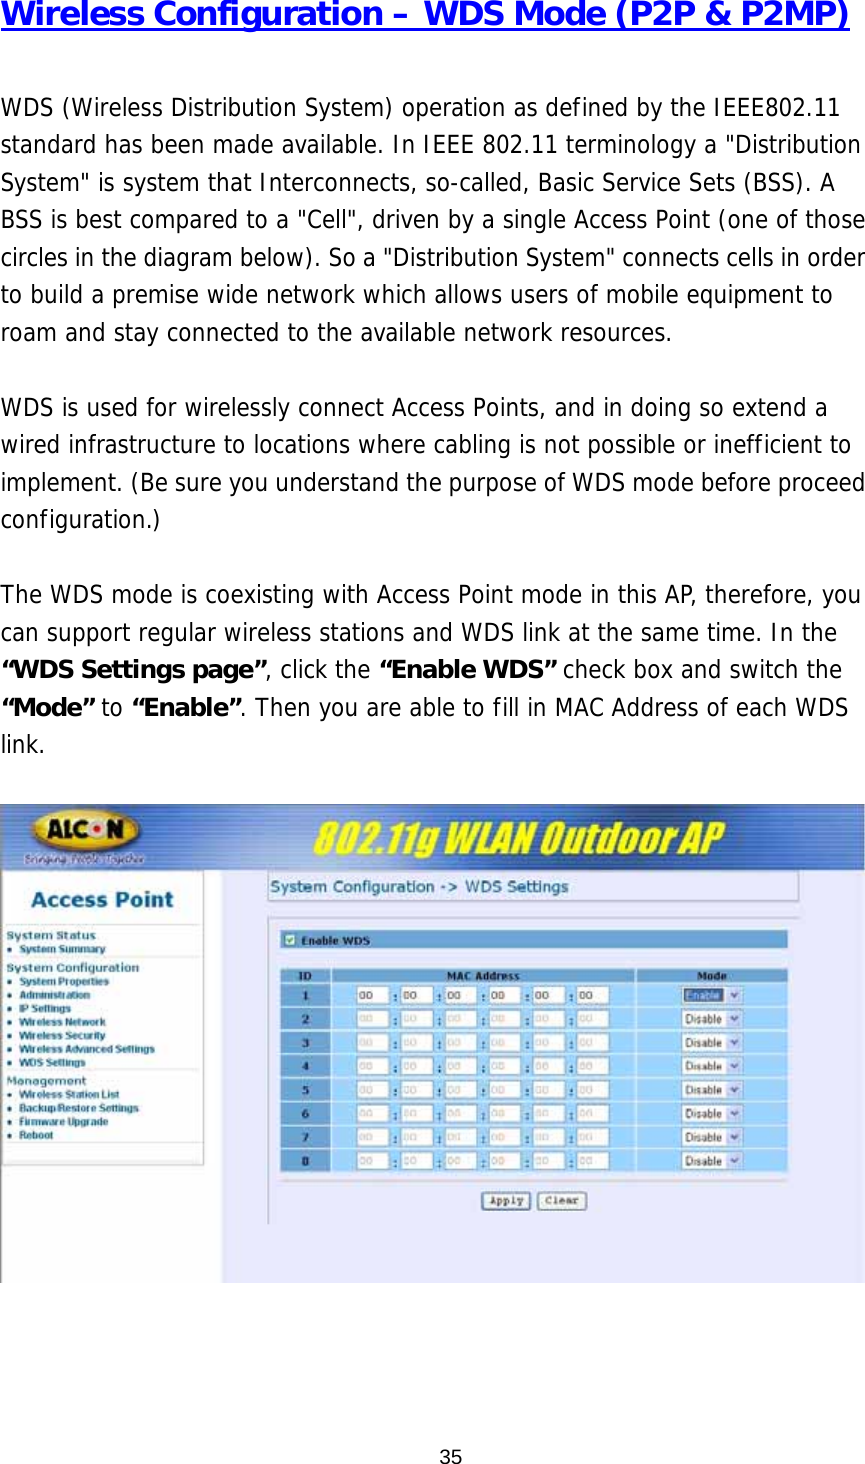 Wireless Configuration – WDS Mode (P2P &amp; P2MP)  WDS (Wireless Distribution System) operation as defined by the IEEE802.11 standard has been made available. In IEEE 802.11 terminology a &quot;Distribution System&quot; is system that Interconnects, so-called, Basic Service Sets (BSS). A BSS is best compared to a &quot;Cell&quot;, driven by a single Access Point (one of those circles in the diagram below). So a &quot;Distribution System&quot; connects cells in order to build a premise wide network which allows users of mobile equipment to roam and stay connected to the available network resources.   WDS is used for wirelessly connect Access Points, and in doing so extend a wired infrastructure to locations where cabling is not possible or inefficient to implement. (Be sure you understand the purpose of WDS mode before proceed configuration.)  The WDS mode is coexisting with Access Point mode in this AP, therefore, you can support regular wireless stations and WDS link at the same time. In the “WDS Settings page”, click the “Enable WDS” check box and switch the “Mode” to “Enable”. Then you are able to fill in MAC Address of each WDS link.         35